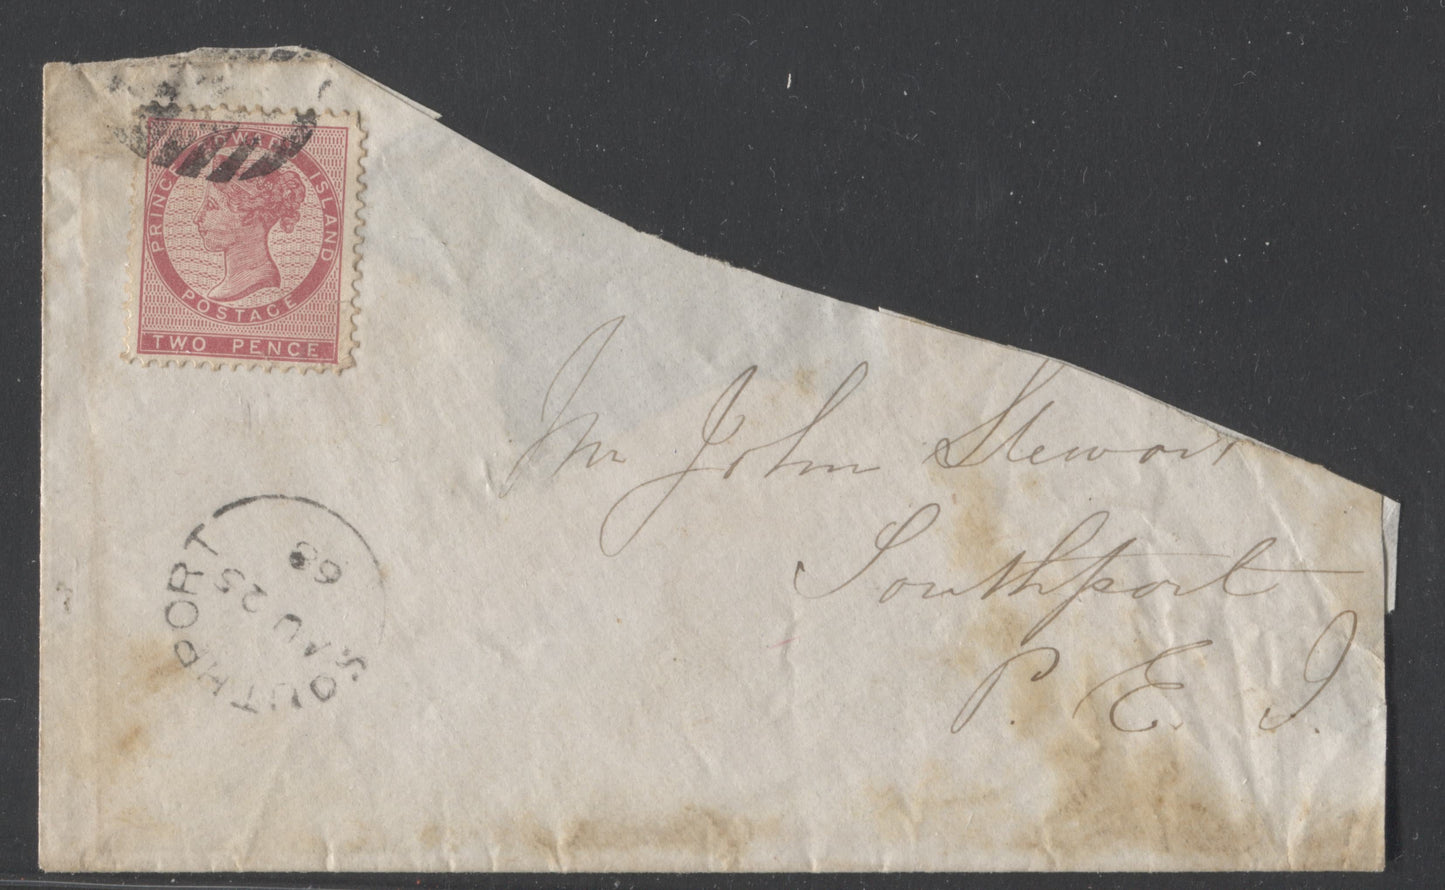 Lot 3 Prince Edward Island #5 2d Deep Rose Perf. 12 x 11.75 Die 1 Single Usage on August 25, 1869 Partial Cover to John Stewart, Politician, Nice Strike of Rare P91 Receiver Cancellation For Southport, One of Only 4 Known!